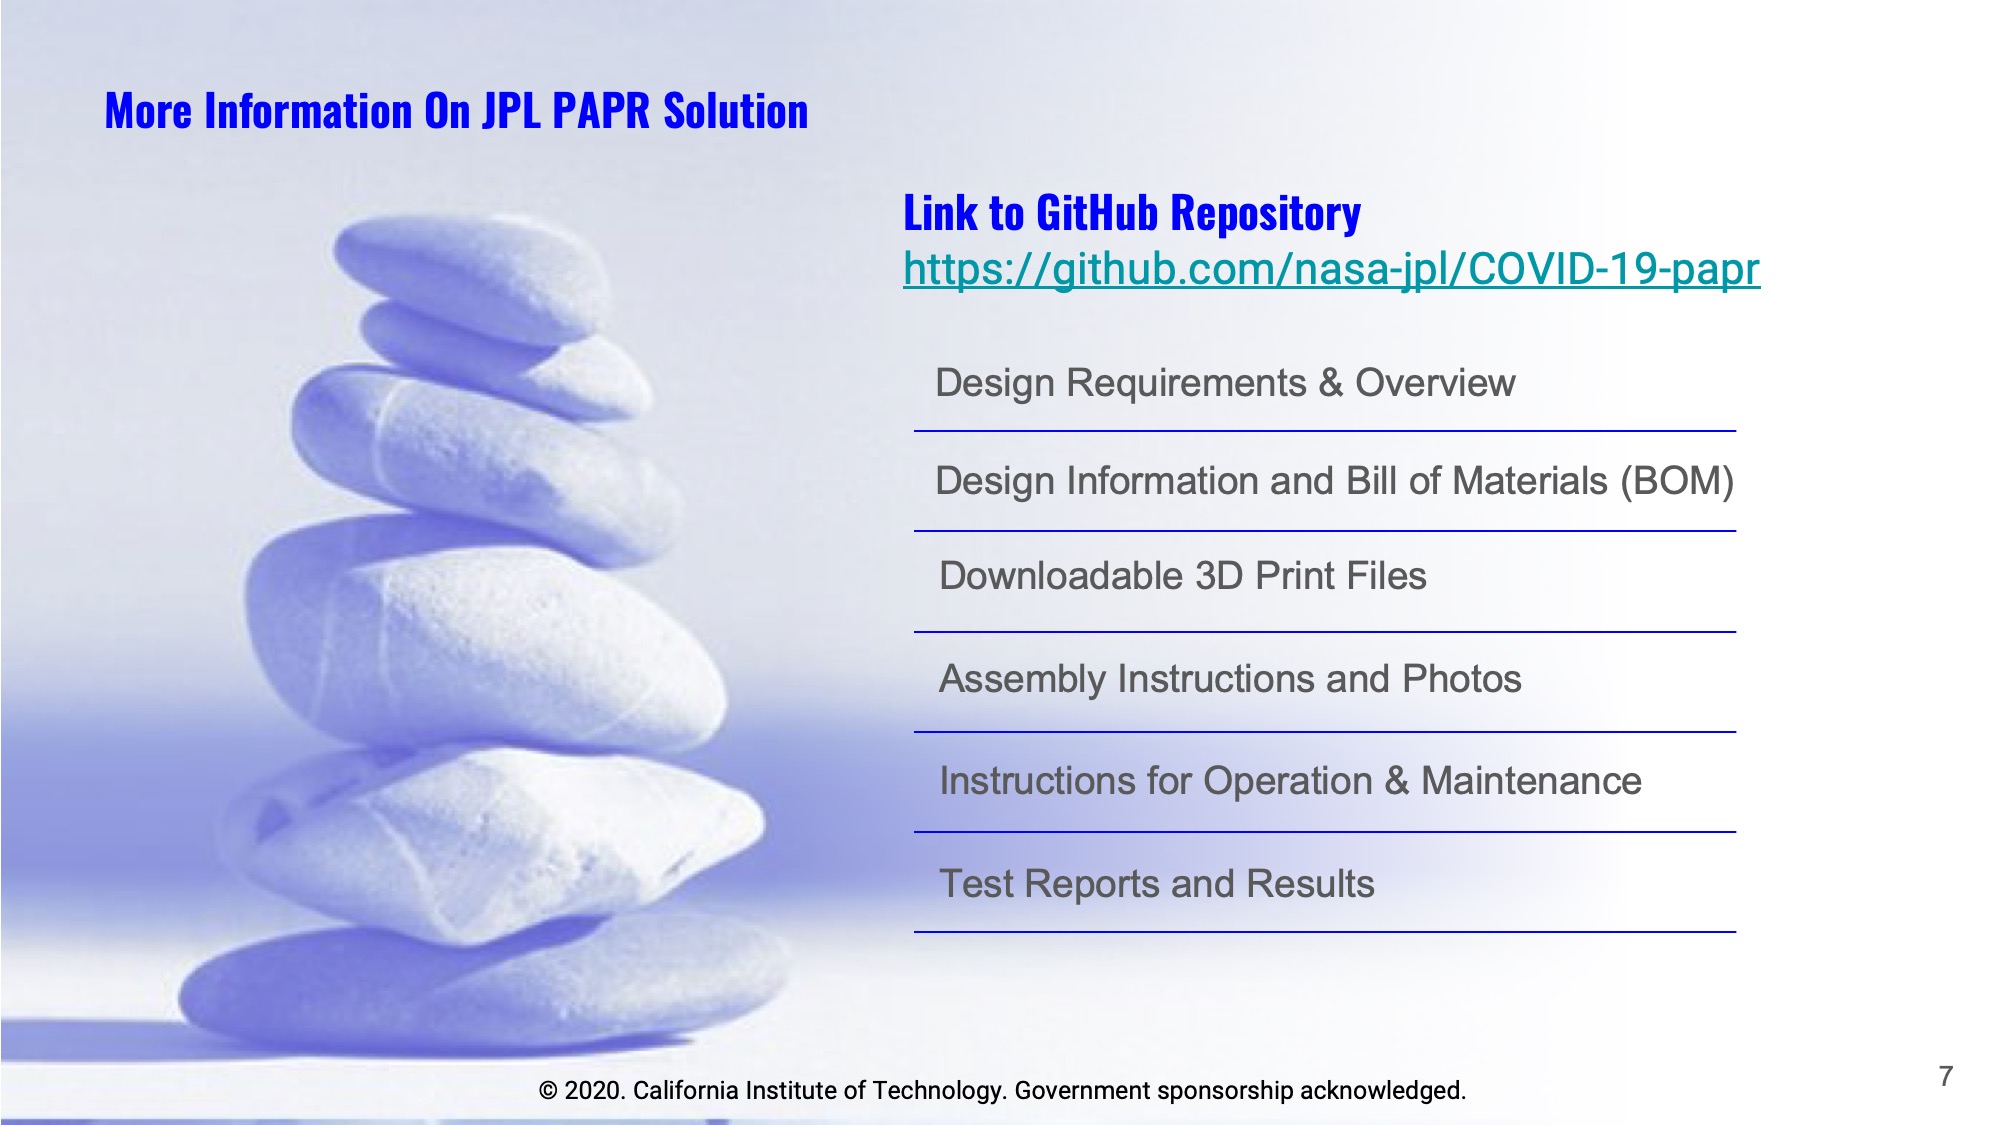 Slide 7: More Information On JPL PAPR Solution: GitHub Repository at https://github.com/nasa-jpl/COVID-19-papr - Design Requirements and Overview - Design Information and Bill of Materials (BOM) - Downloadable 3D Print Files - Assembly Instructions and Photos - Instructions for Operation & Maintenance - Test Reports and Results.